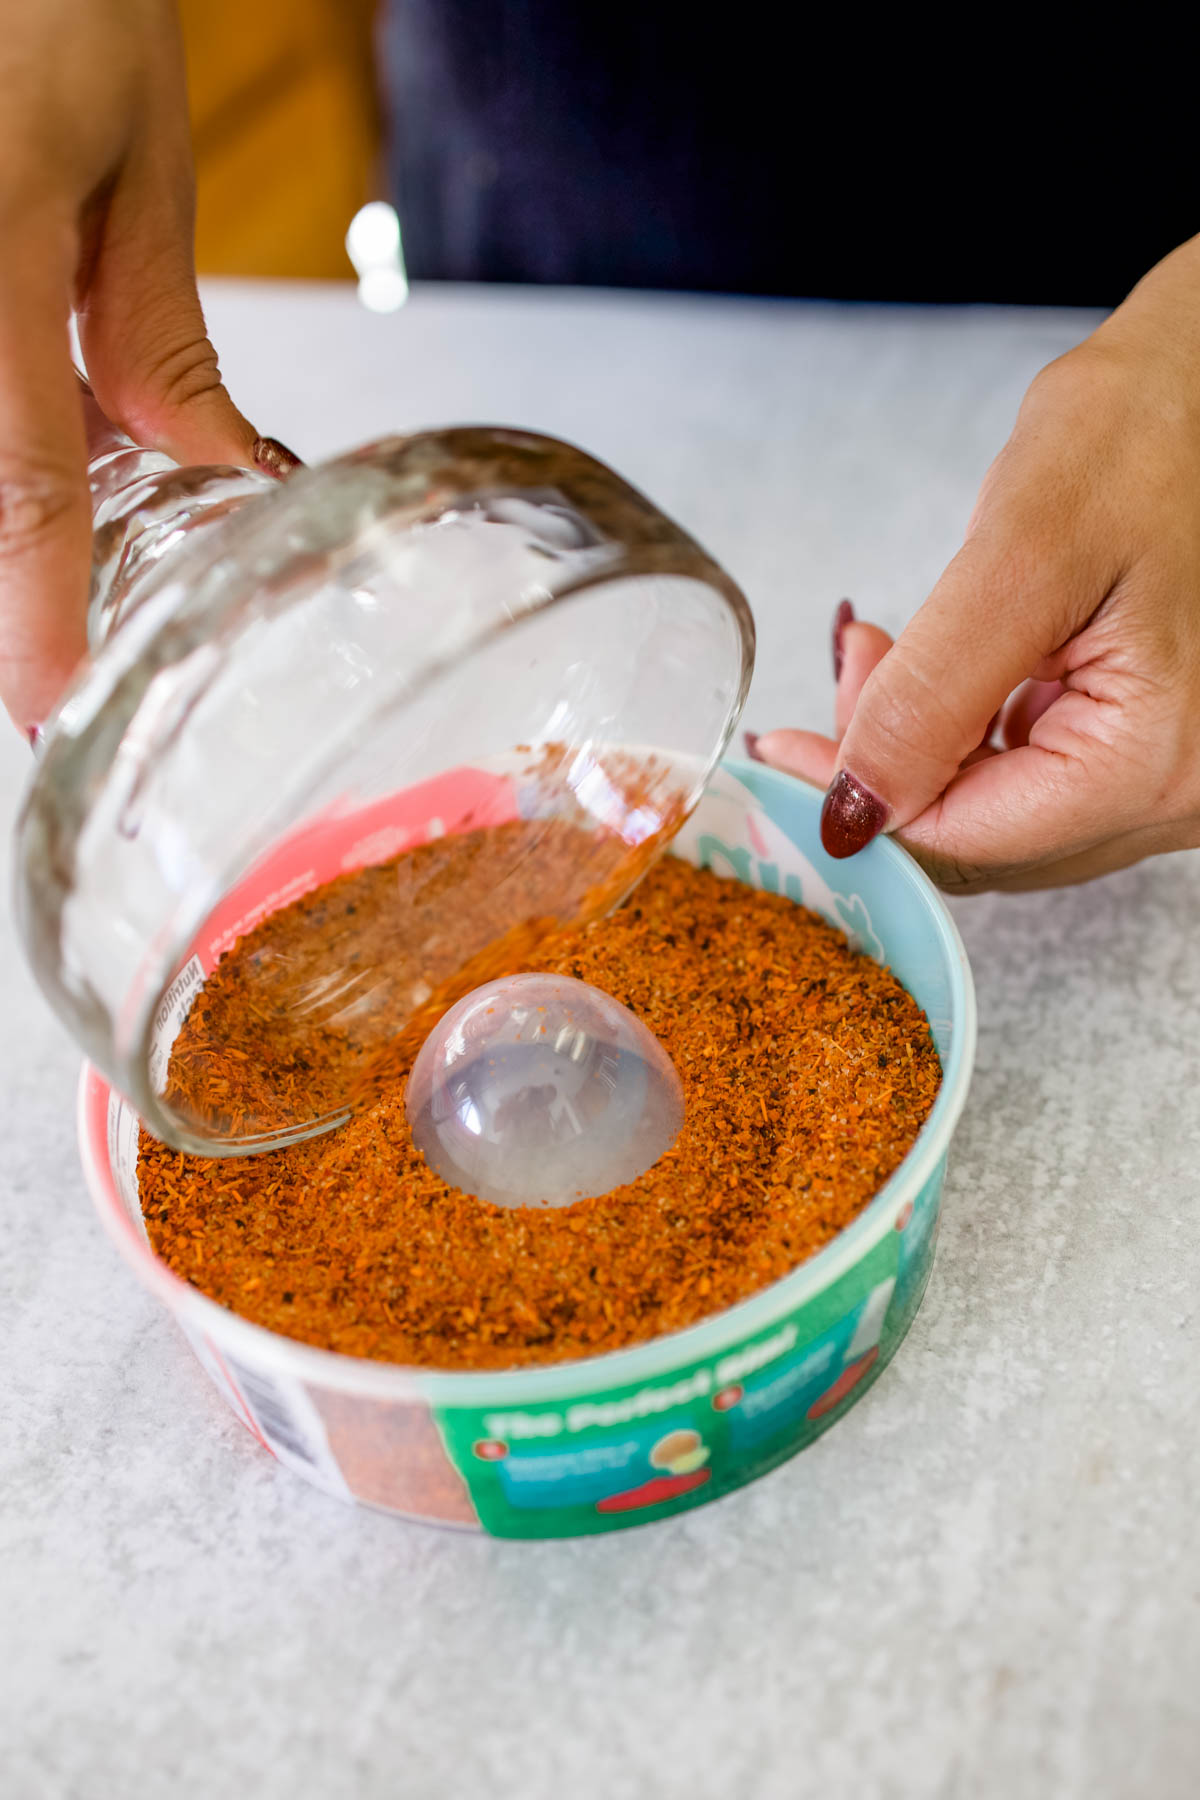 A hand dipping one side of the margarita glass in a Tajin and salt mixture on a small plastic container.